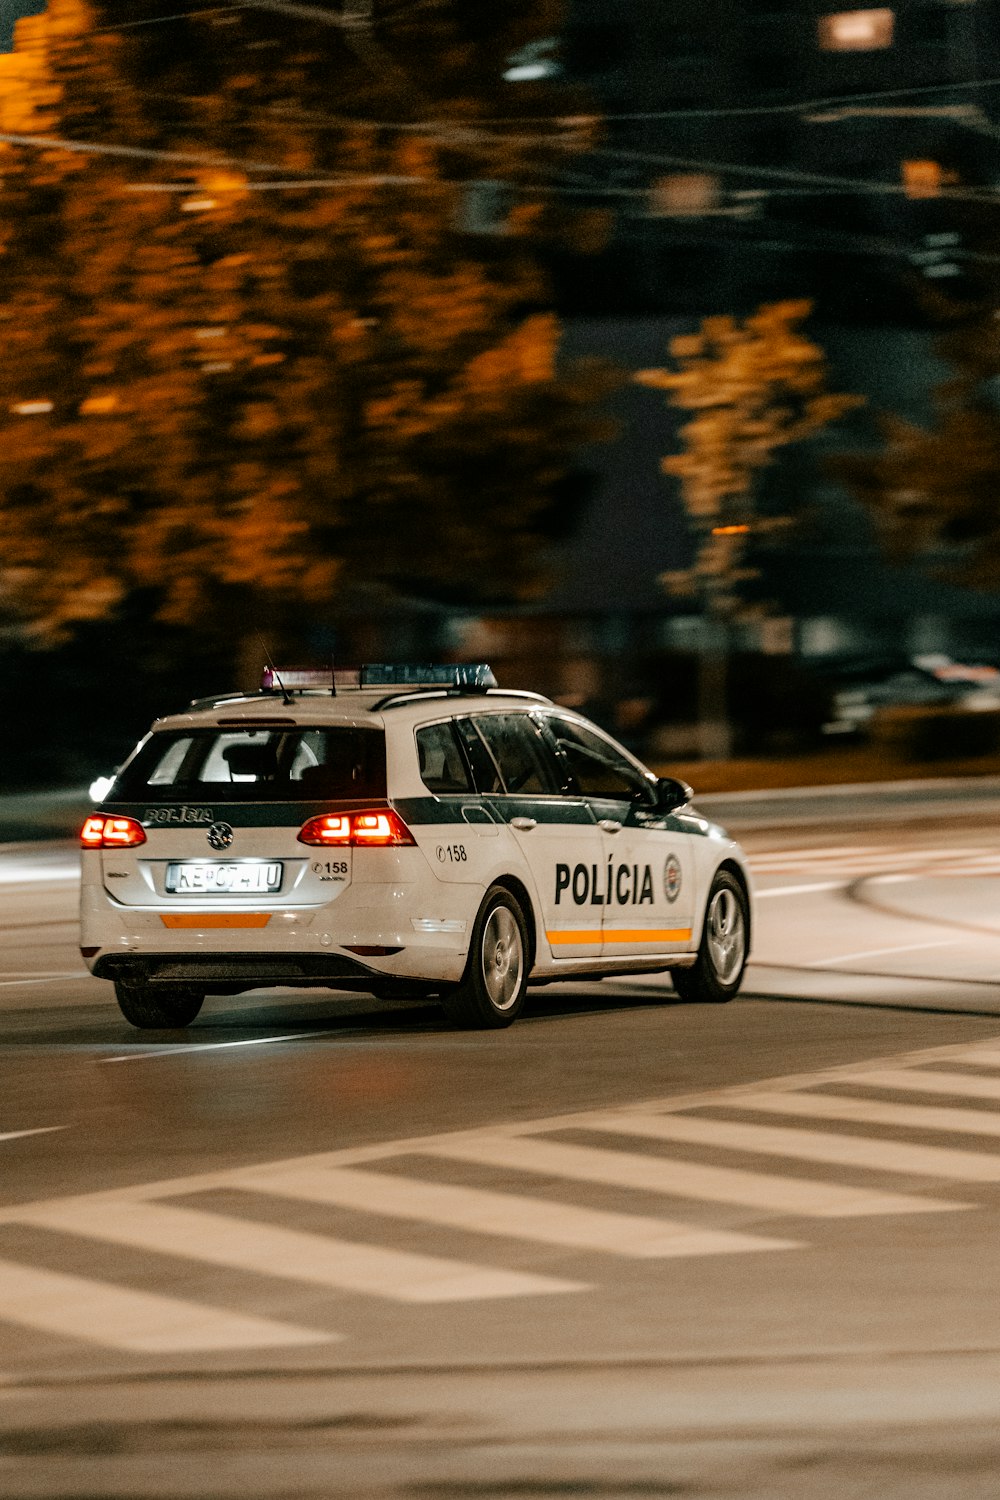 a police car driving down a street at night